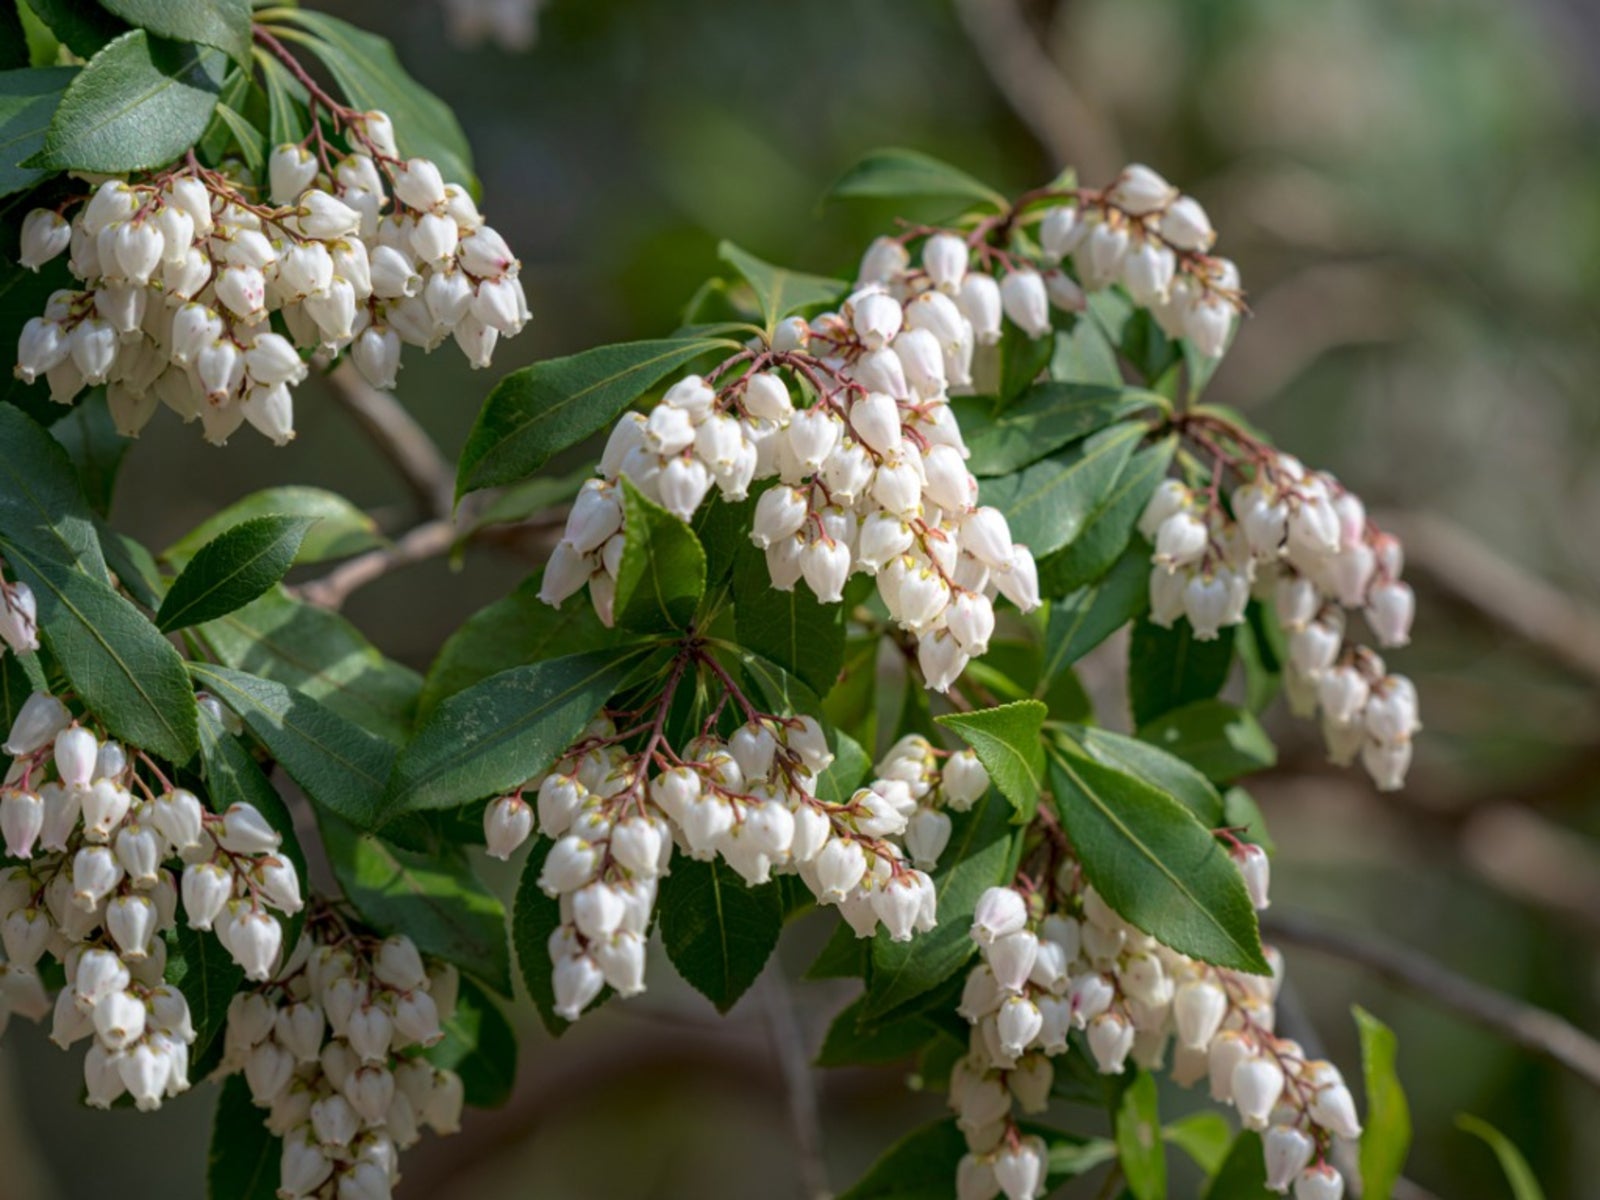 andromeda plant info - learn about pieris japonica growing conditions